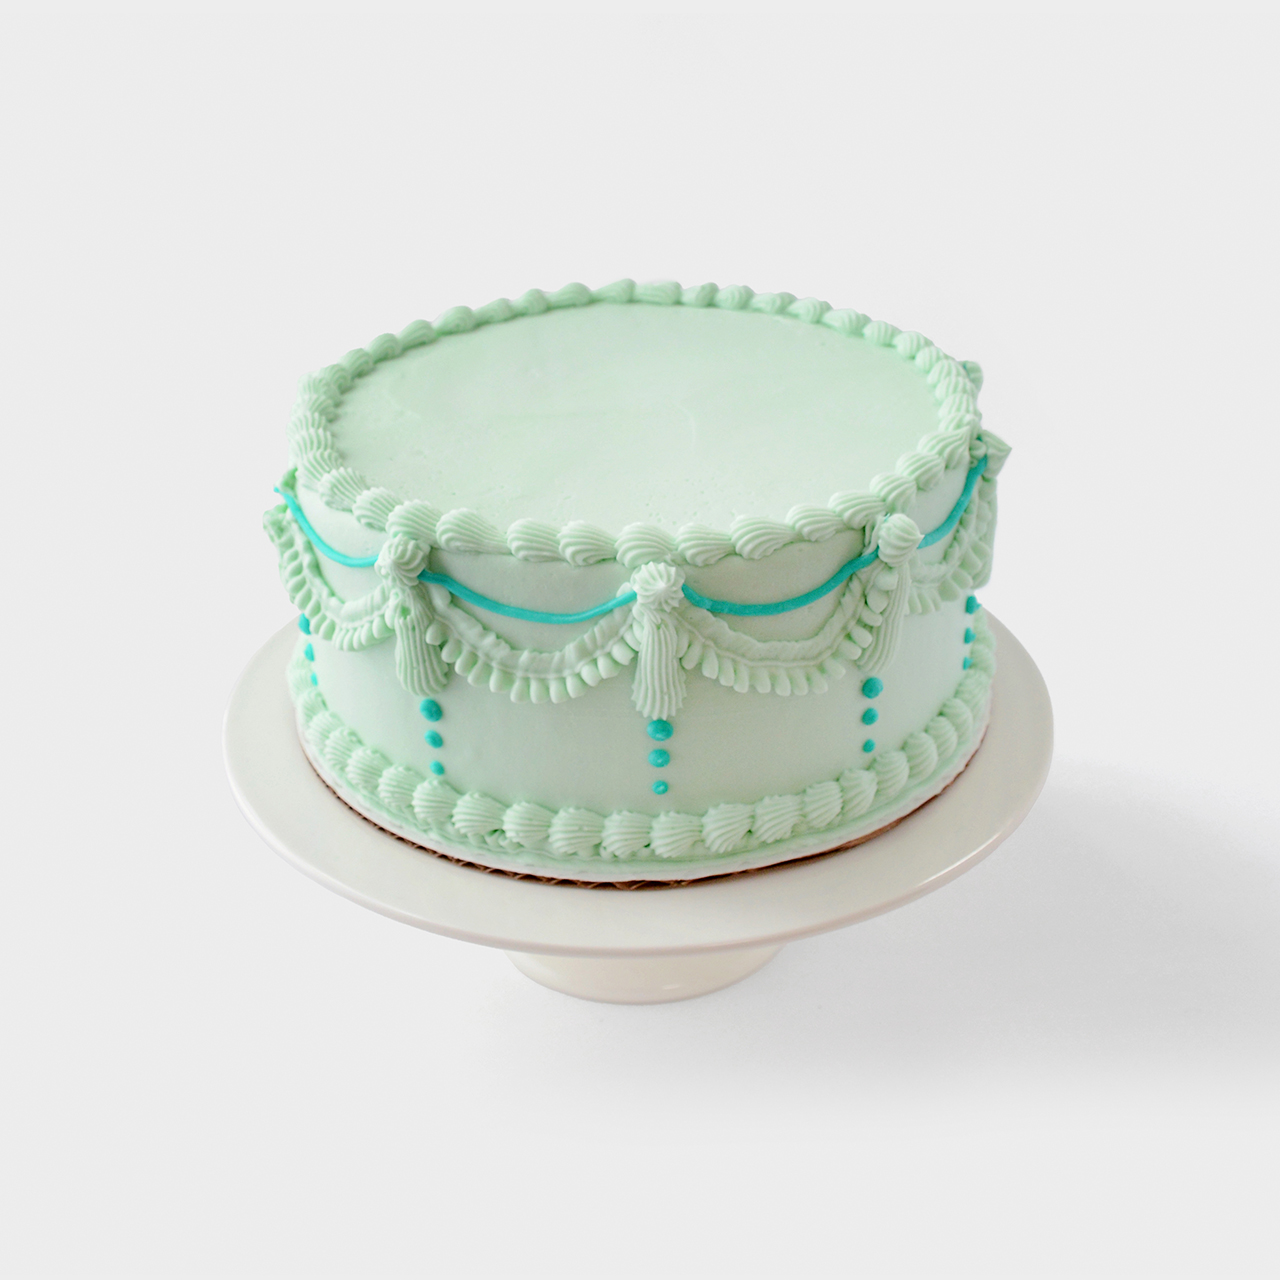 Vintage cake design with light blue buttercream and blue accents 